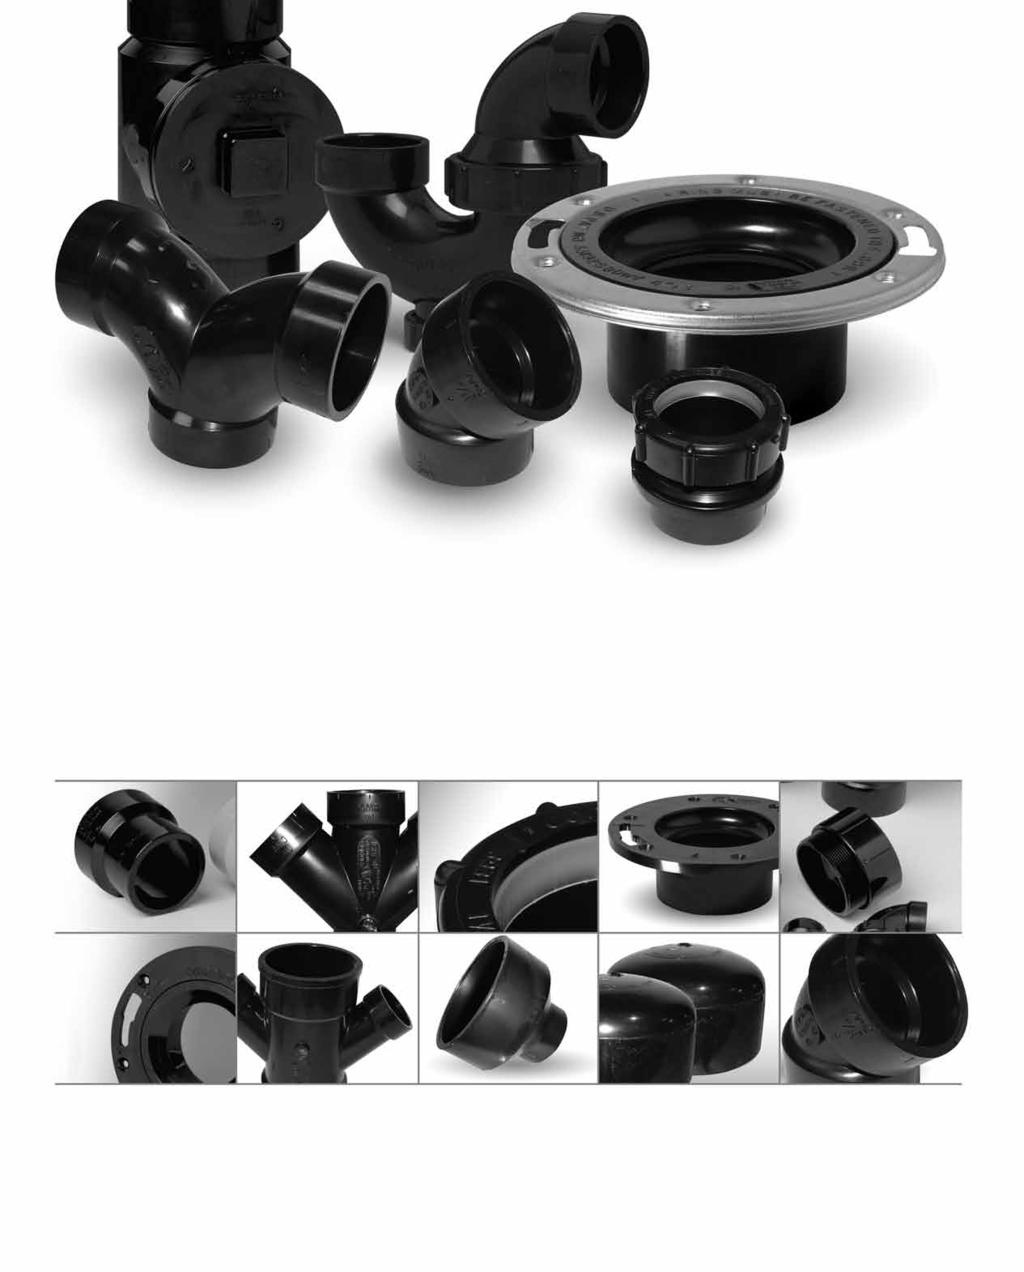 LIST U10-0317-IP ABS DWV FITTINGS MARCH 1, 2017 SUPERSEDES U10-1116-IP (NOVEMBER 1, 2016) Our website pricing is the current list